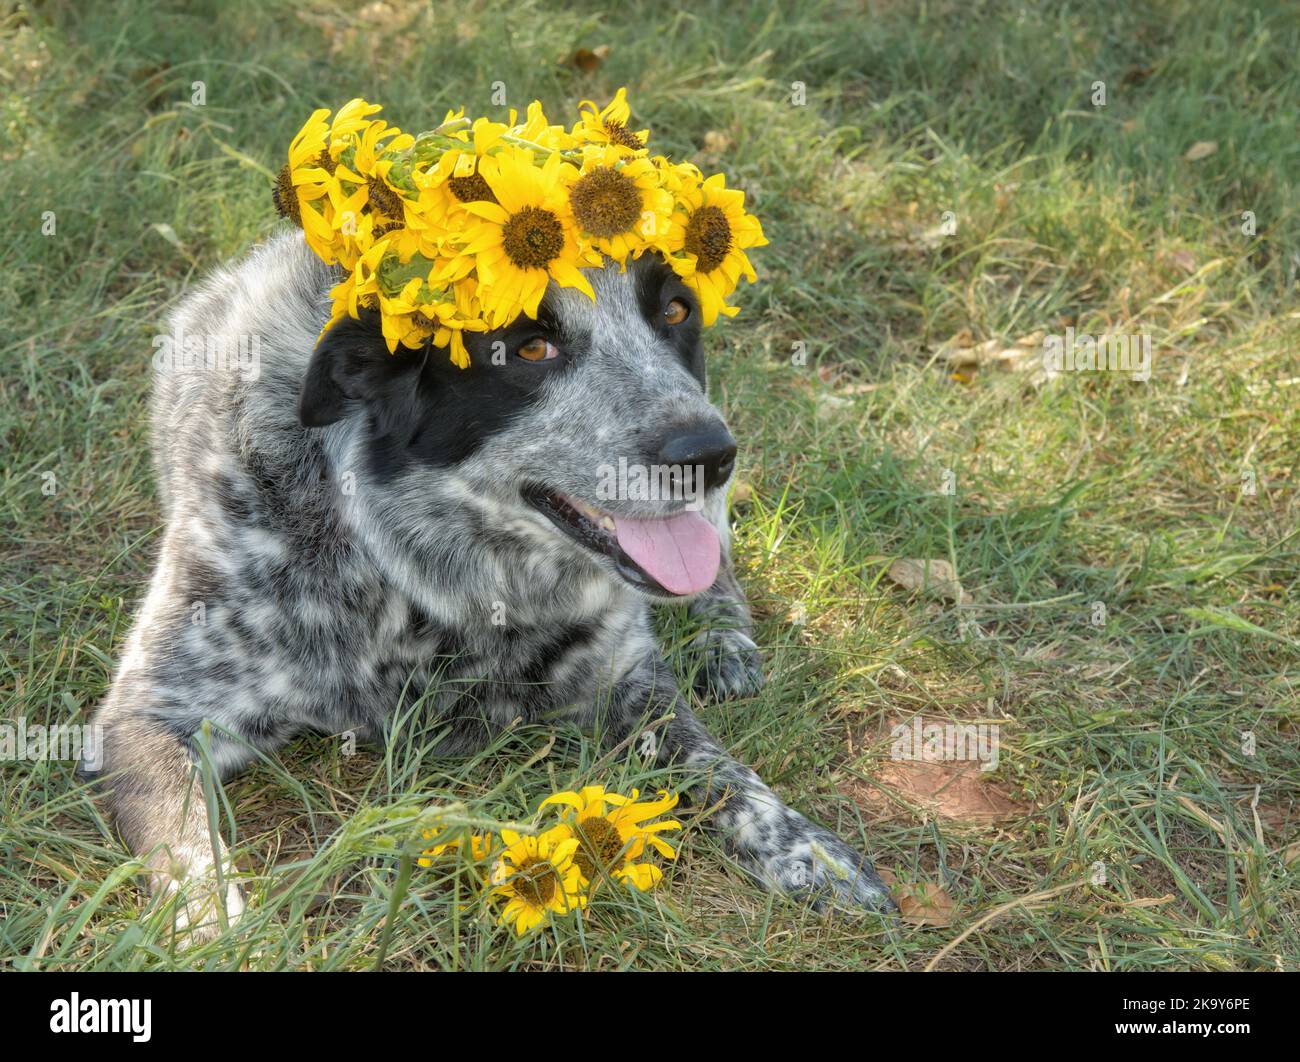 Adorable black and white spotted dog wearing a sunflower wreath, looking at the viewer Stock Photo